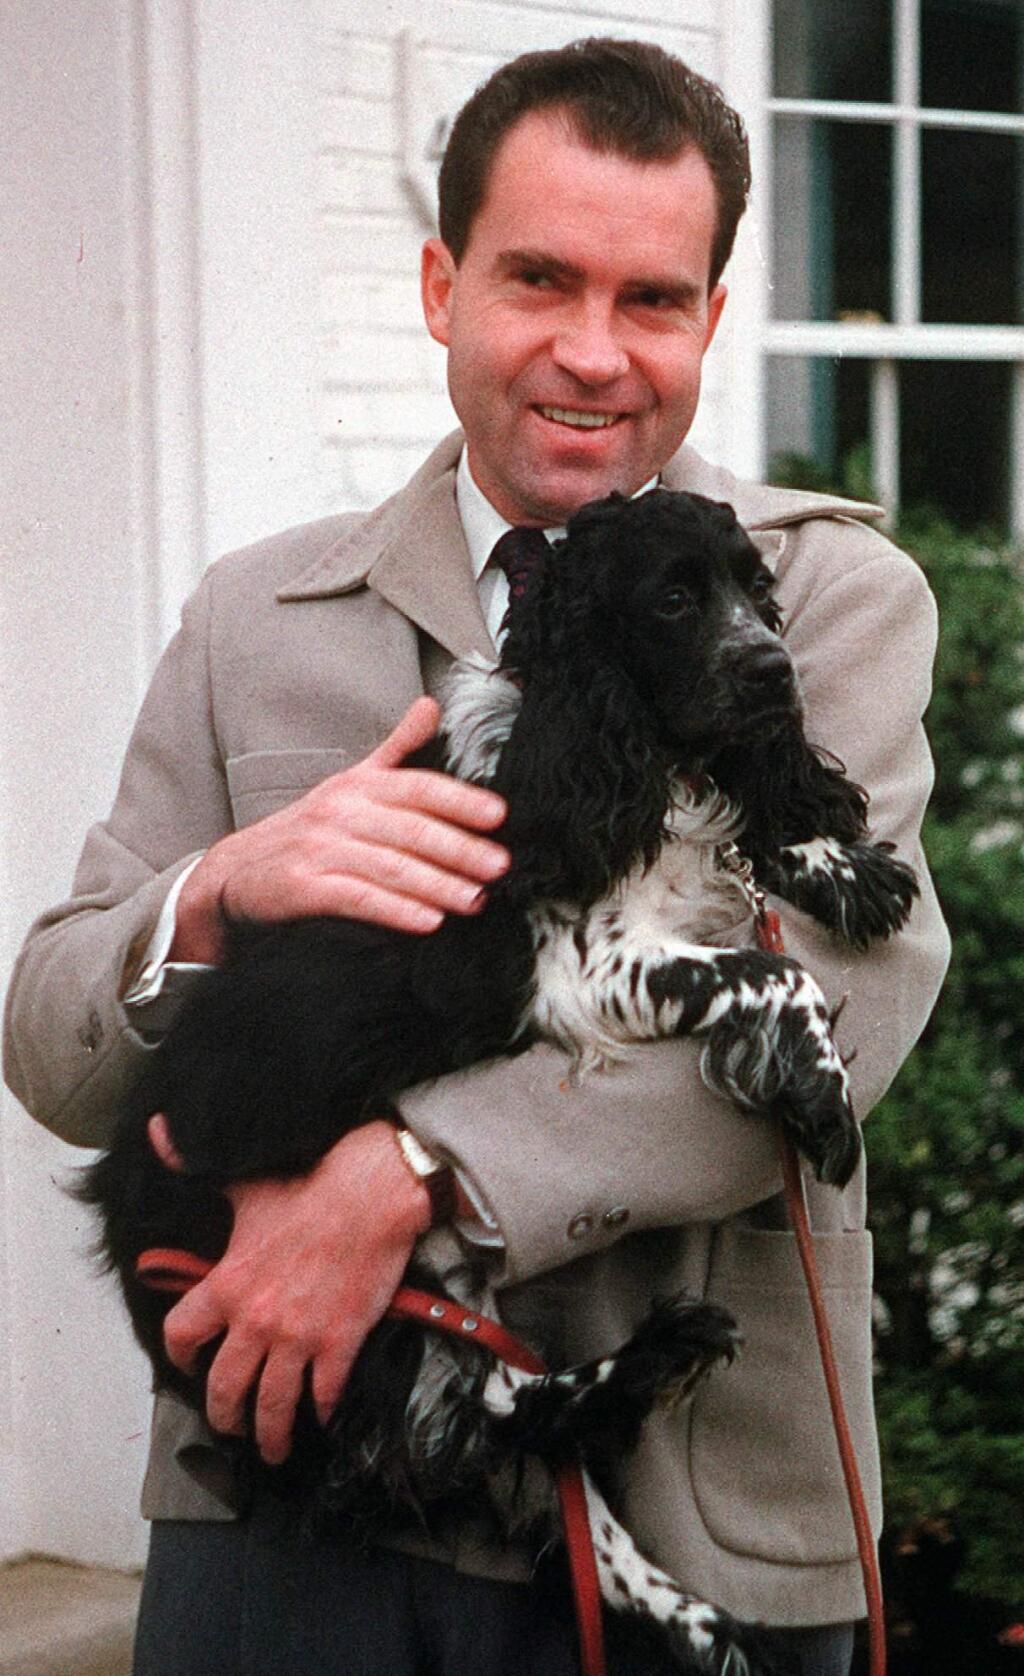 FILE-- Richard Nixon is seen with his dog 'Checkers,' at his home in Spring Valley neighborhood of Washington, DC., in this July 2, 1959 file photo. Not even a president should be separated from his faithful dog, especially if the canine helped save his political career. The body of Richard Nixon's cocker spaniel, Checkers, may be exhumed from a New York cemetery and reburied near the former president and his wife Pat in California. (AP Photo/ FILE)